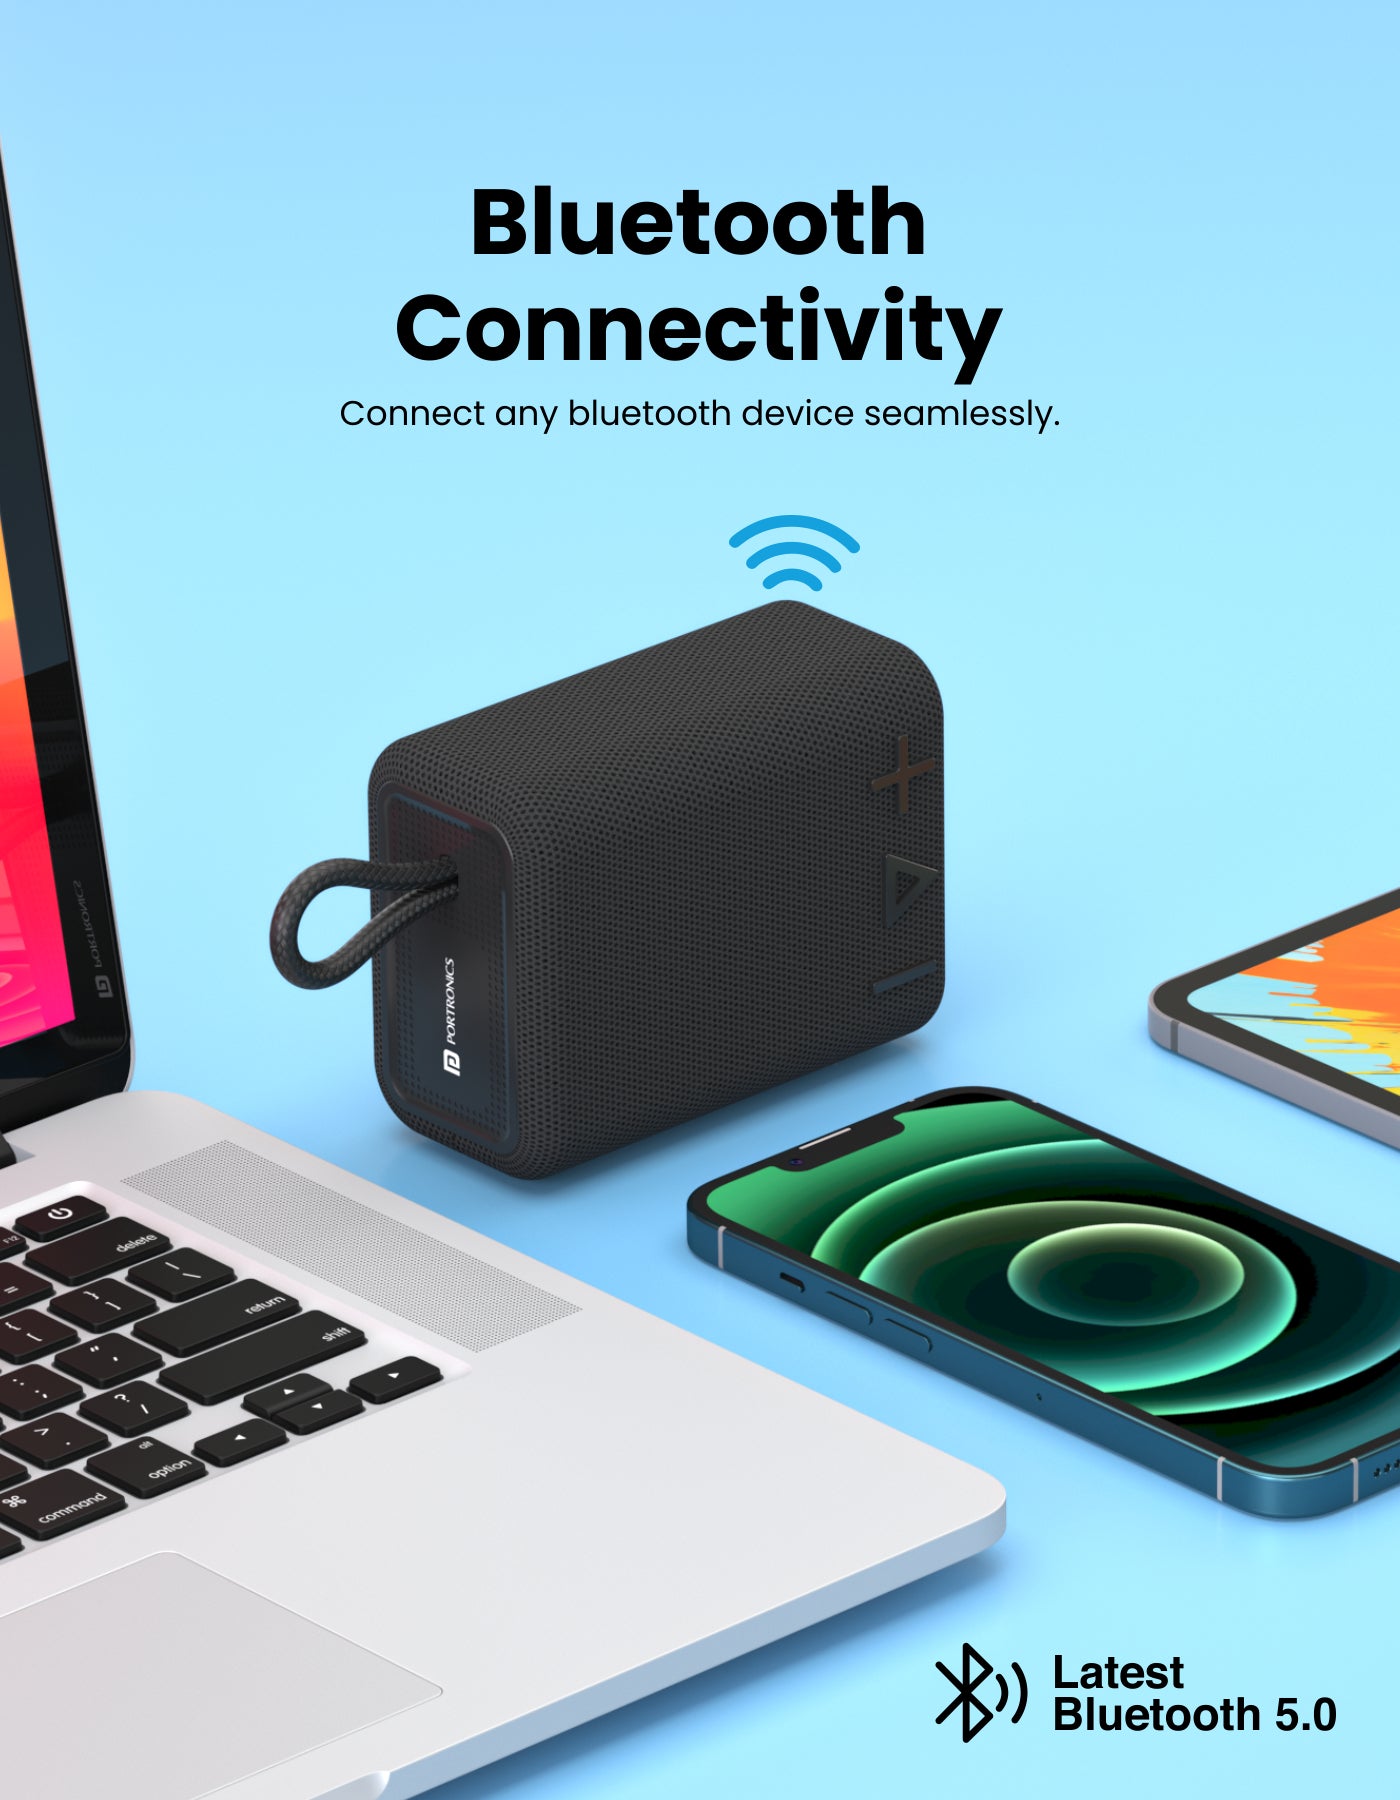 Easy to connect with all devices portronics BREEZE4 portable speaker